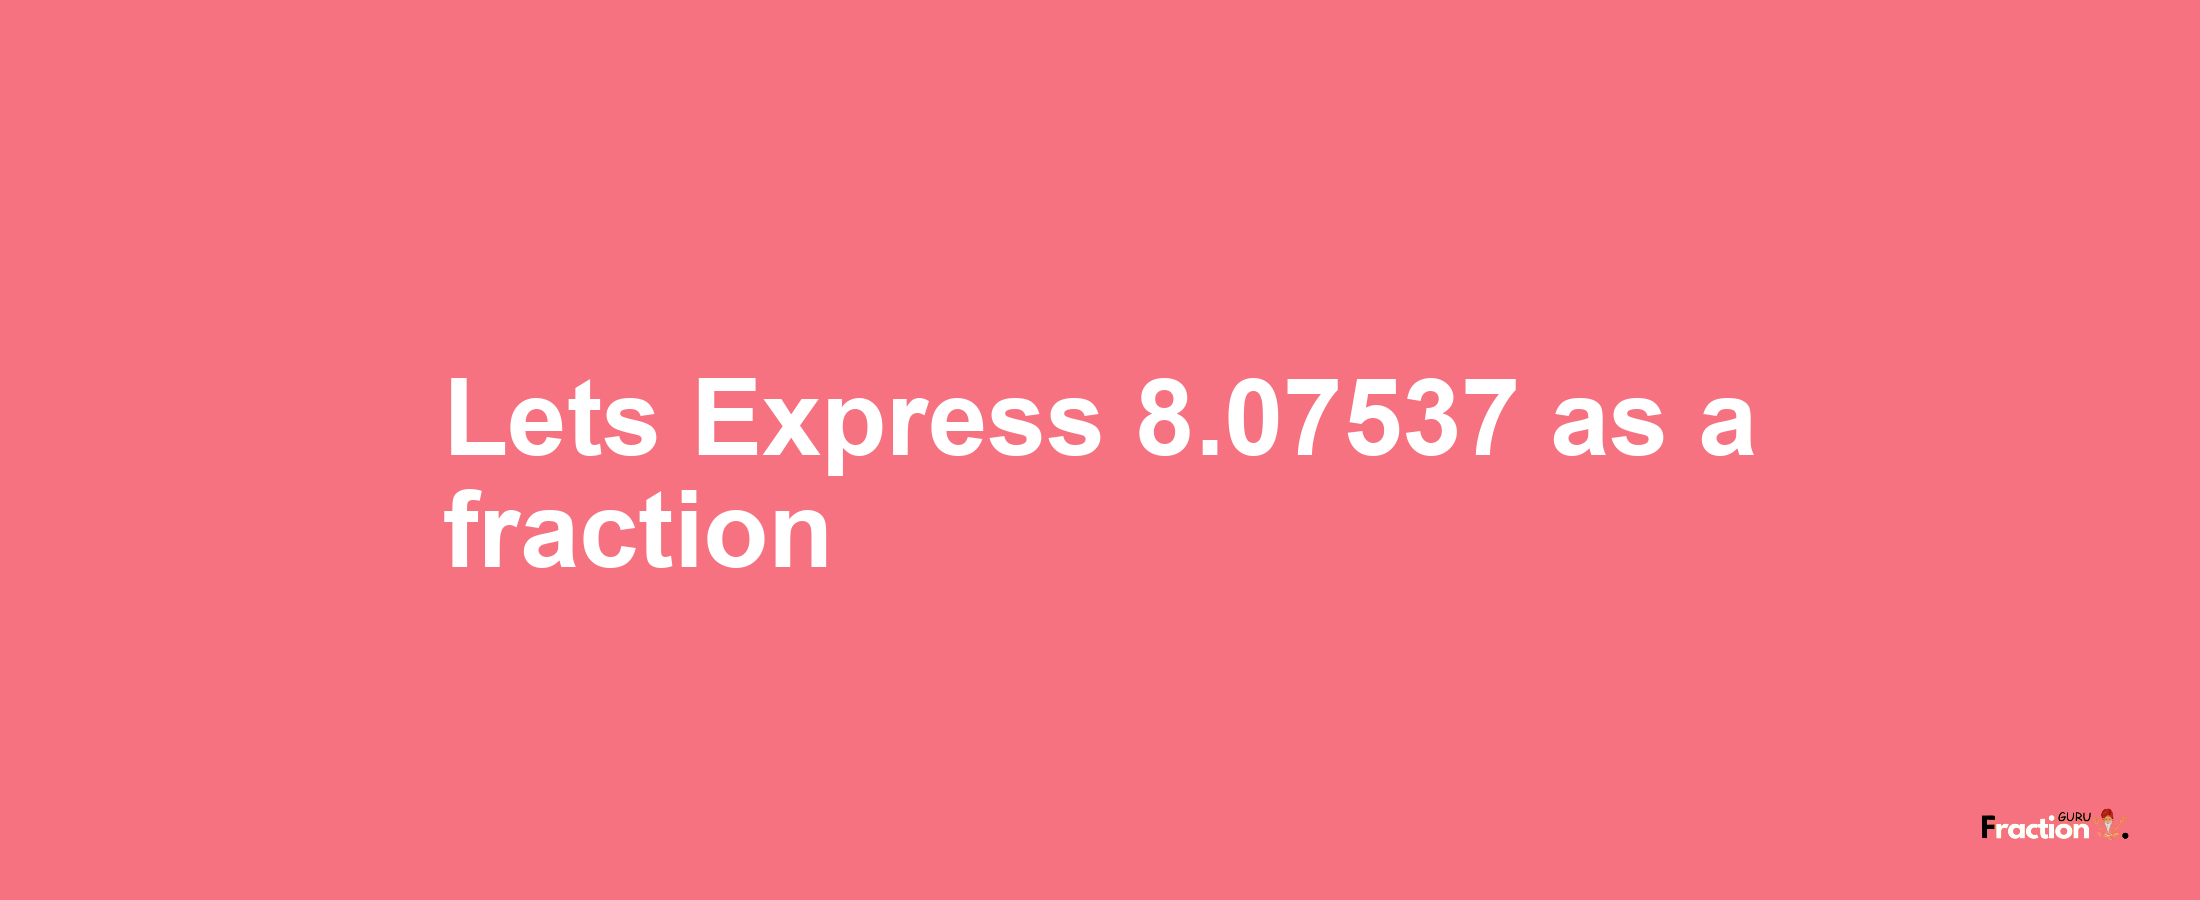 Lets Express 8.07537 as afraction